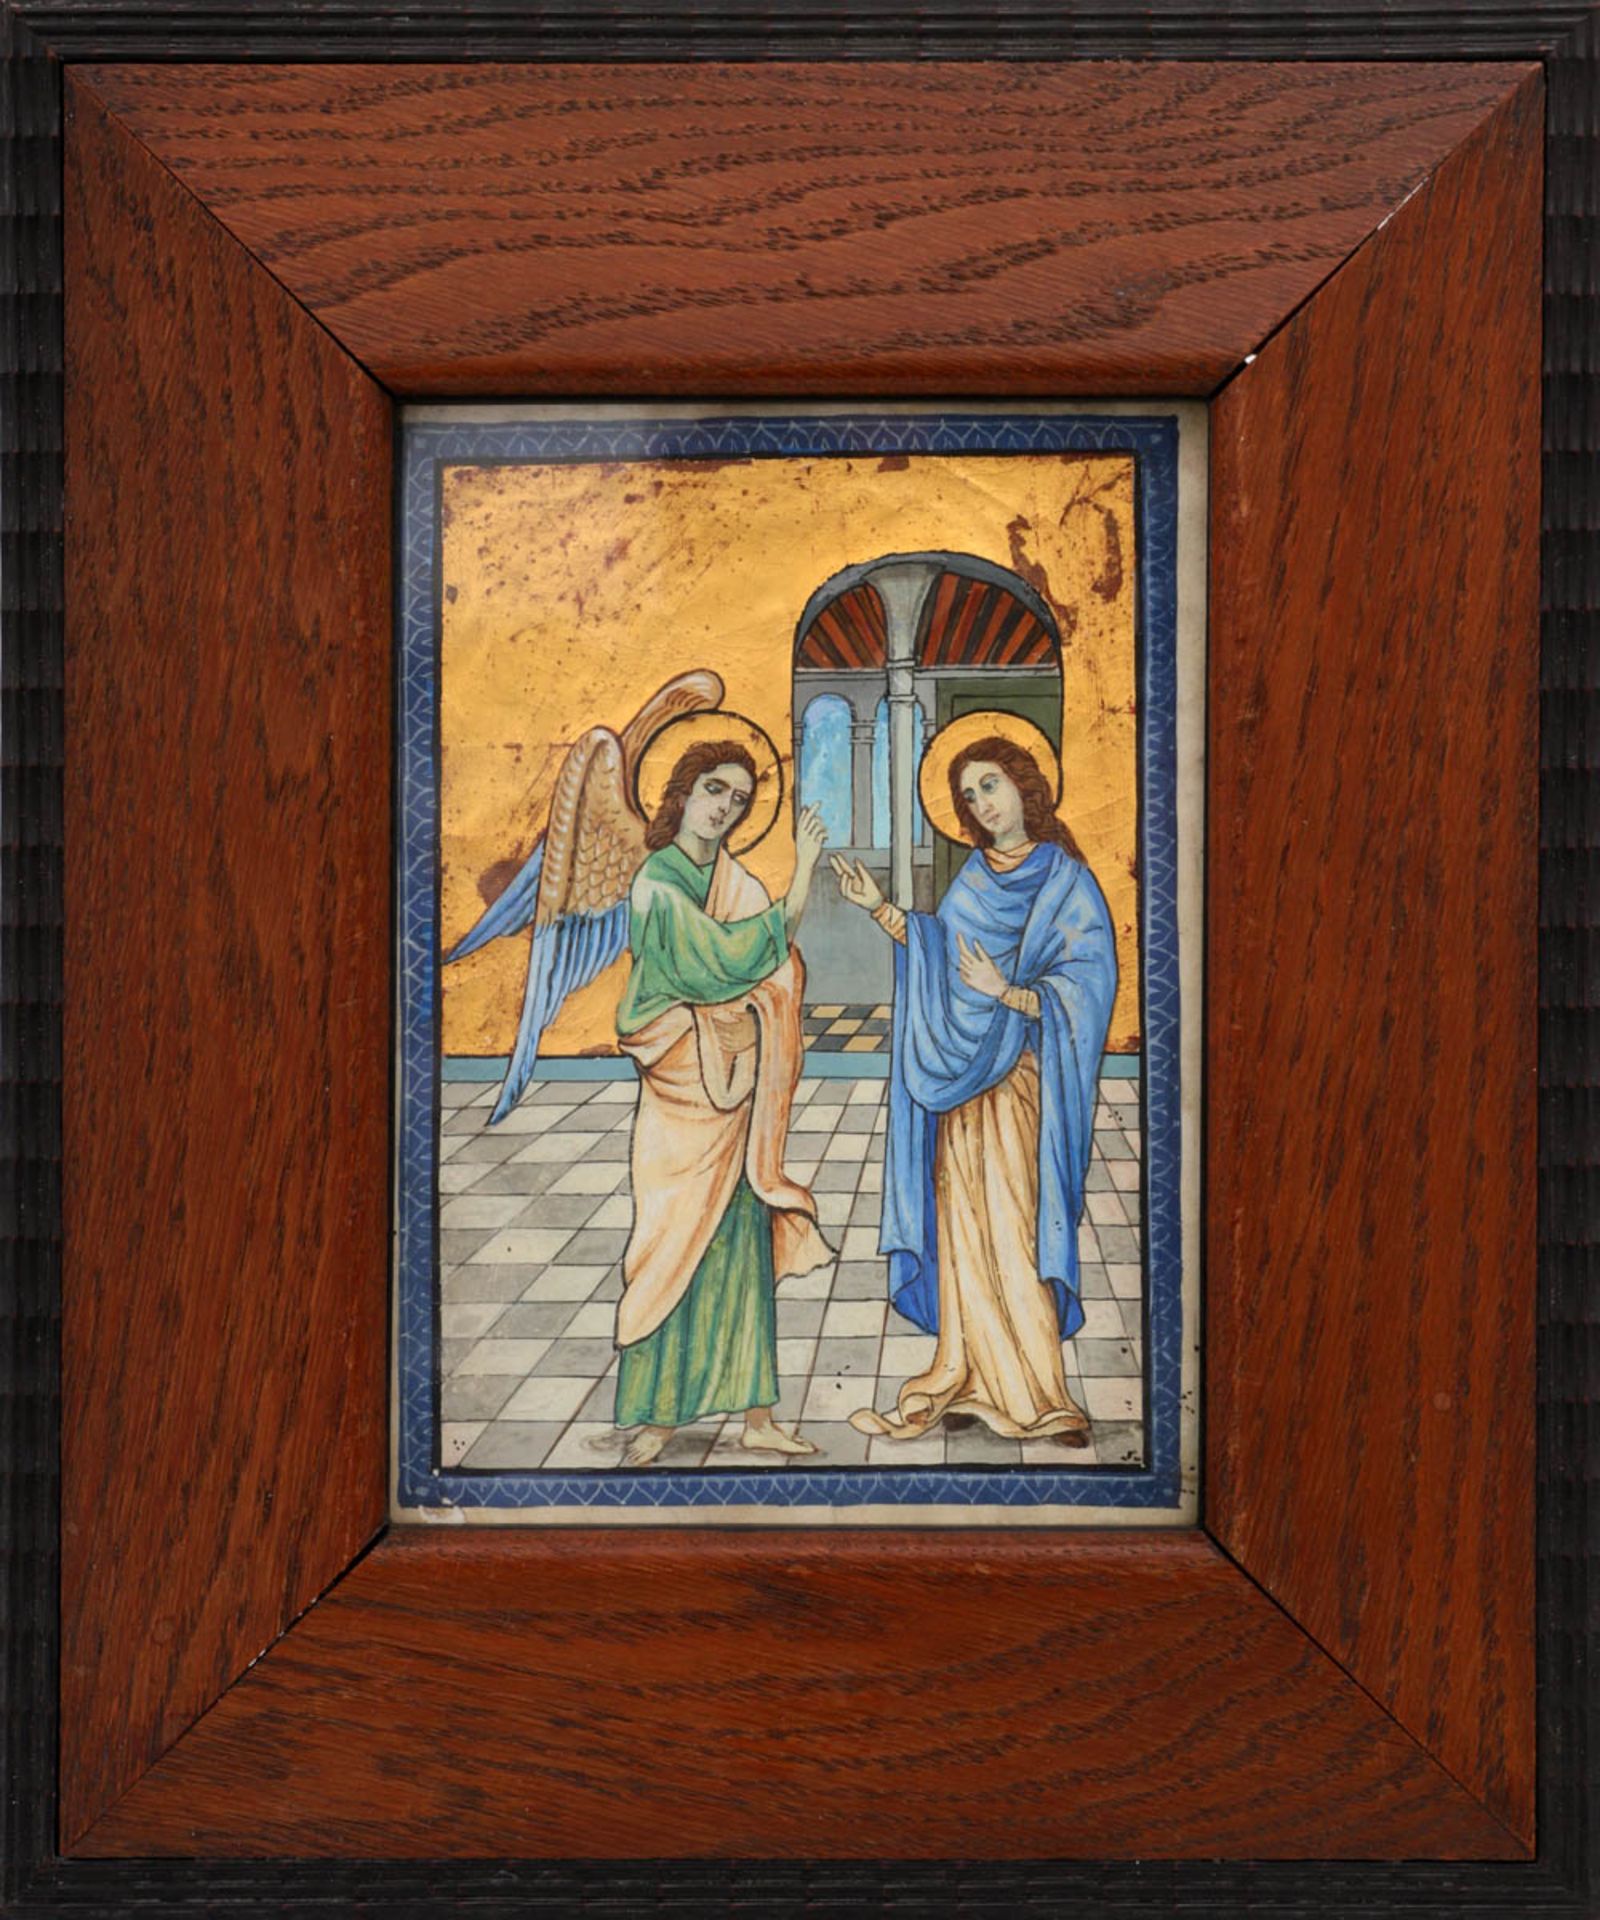 ANNUNCIATION Illumination on vellum. Attributable to France, possibly last quarter of the 15th